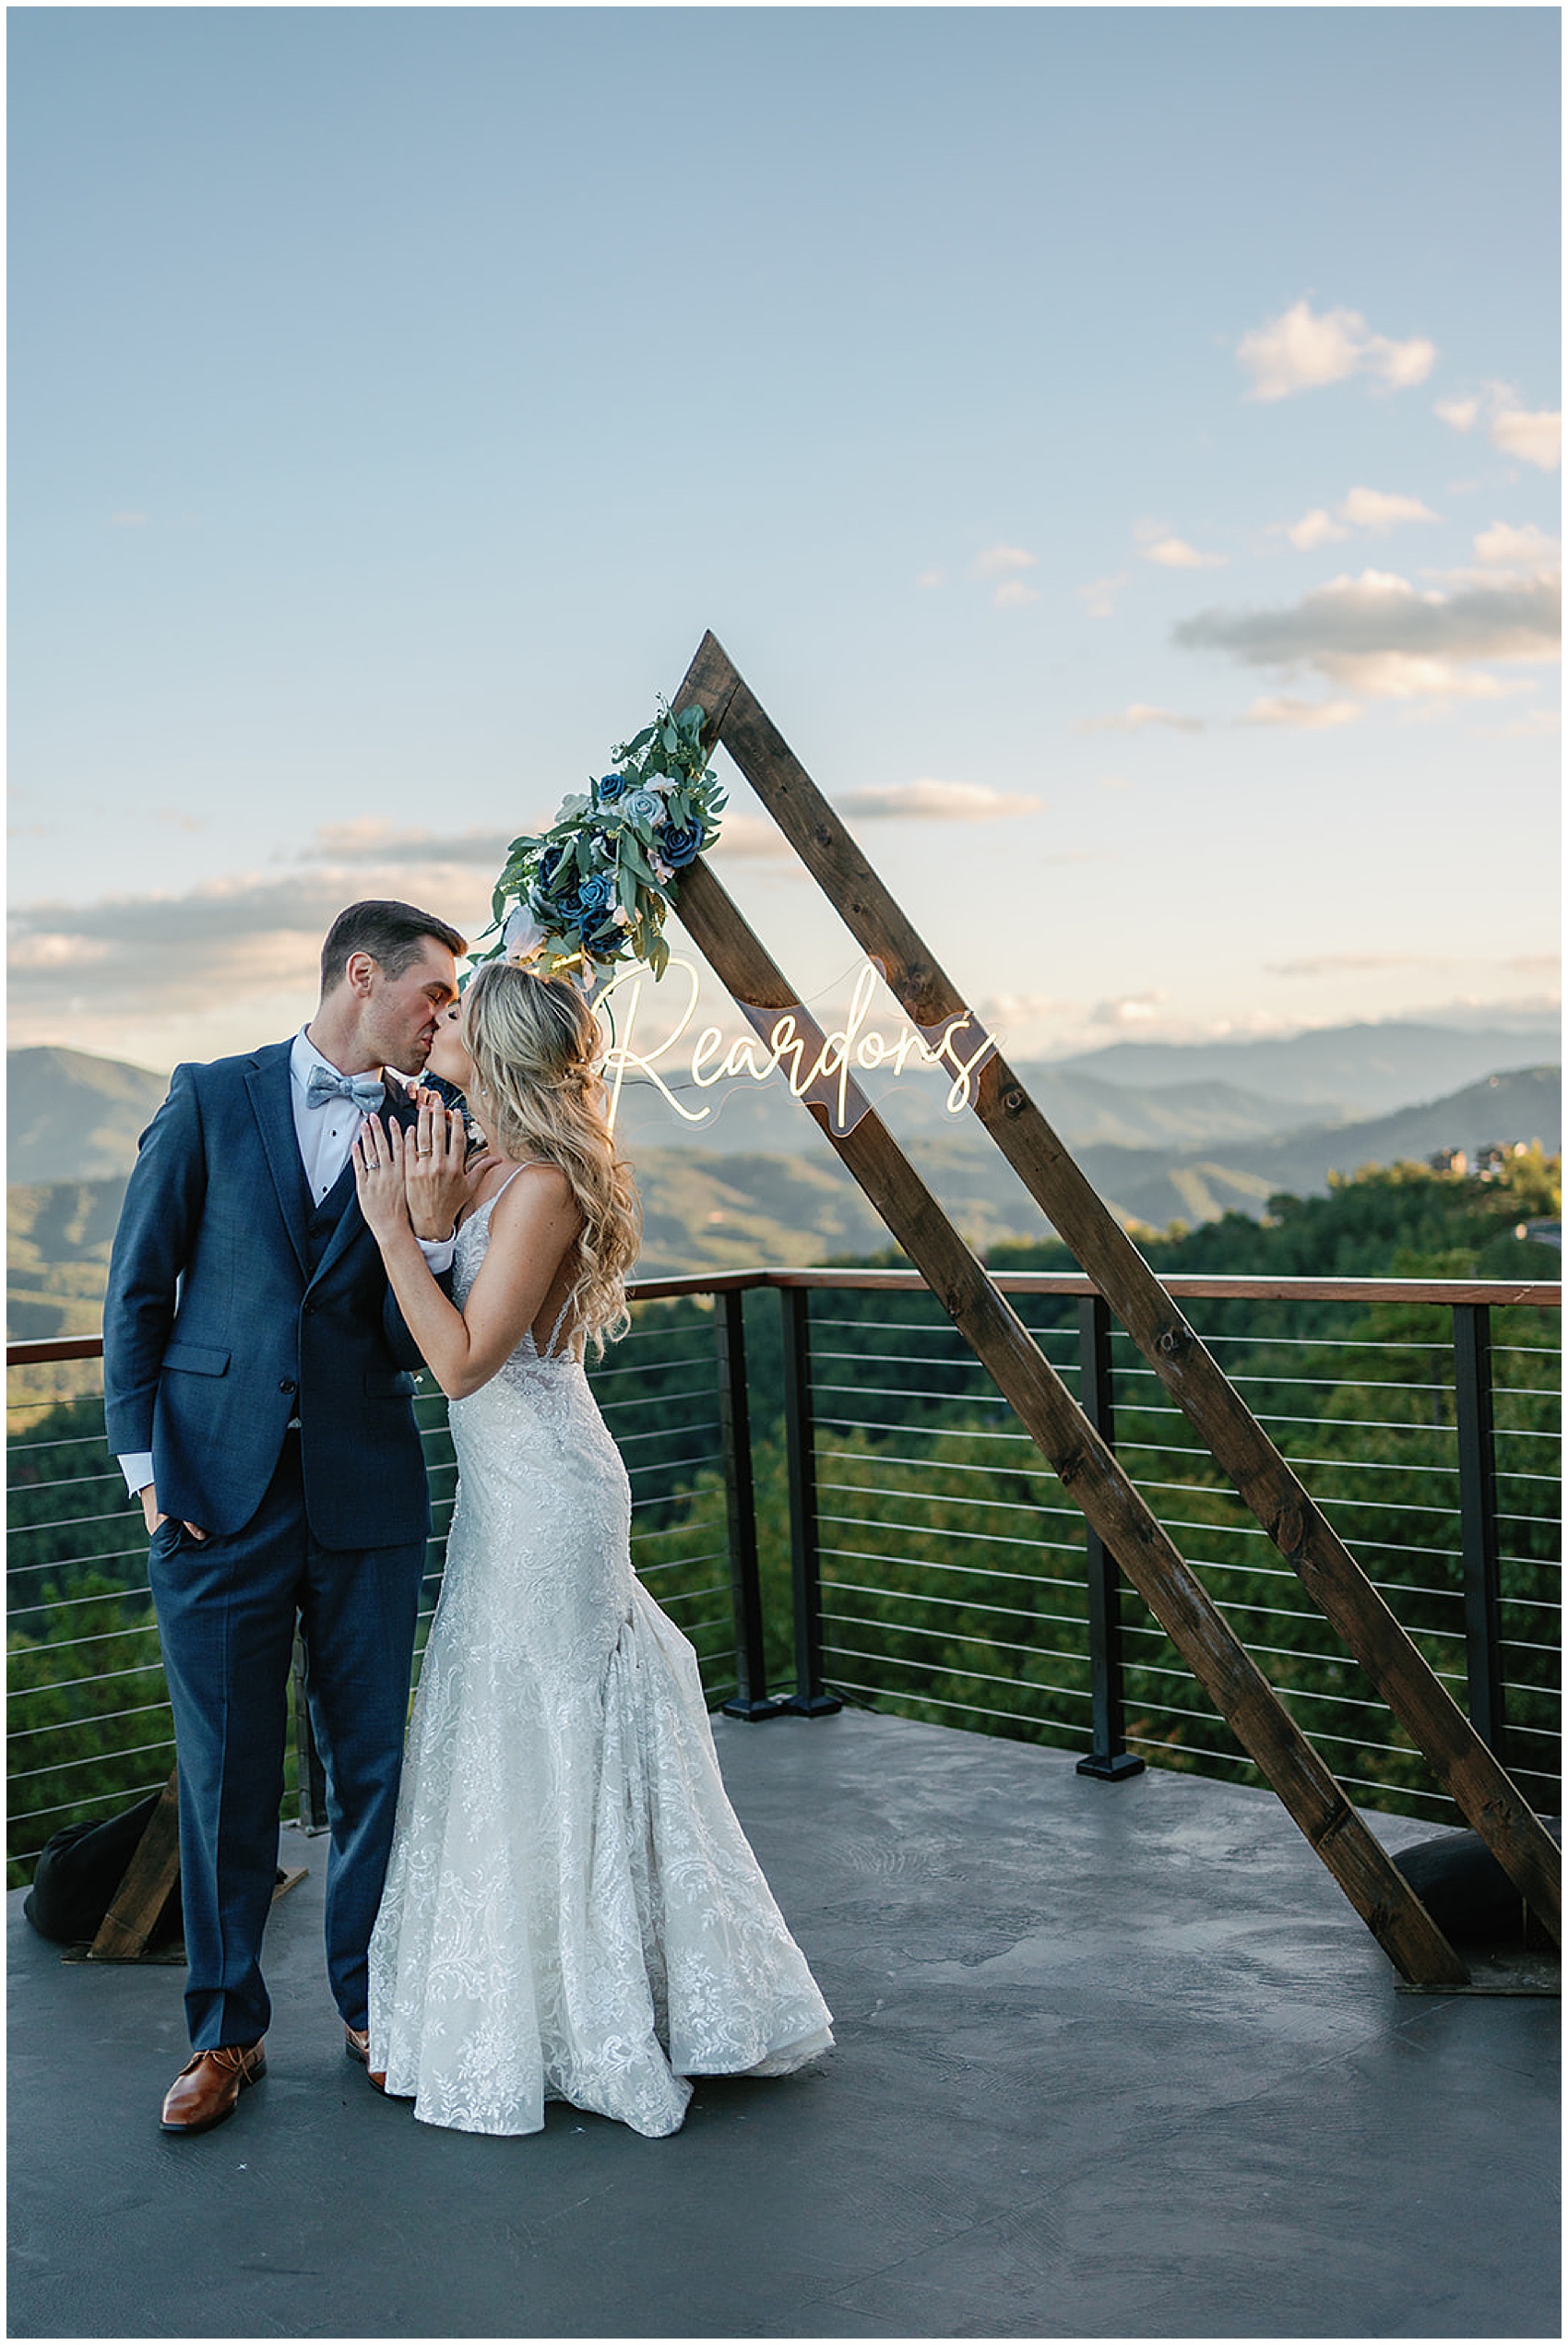 Newlyweds kiss while showing off their rings by their custom wood arbor on a mountain patio at the trillium venue